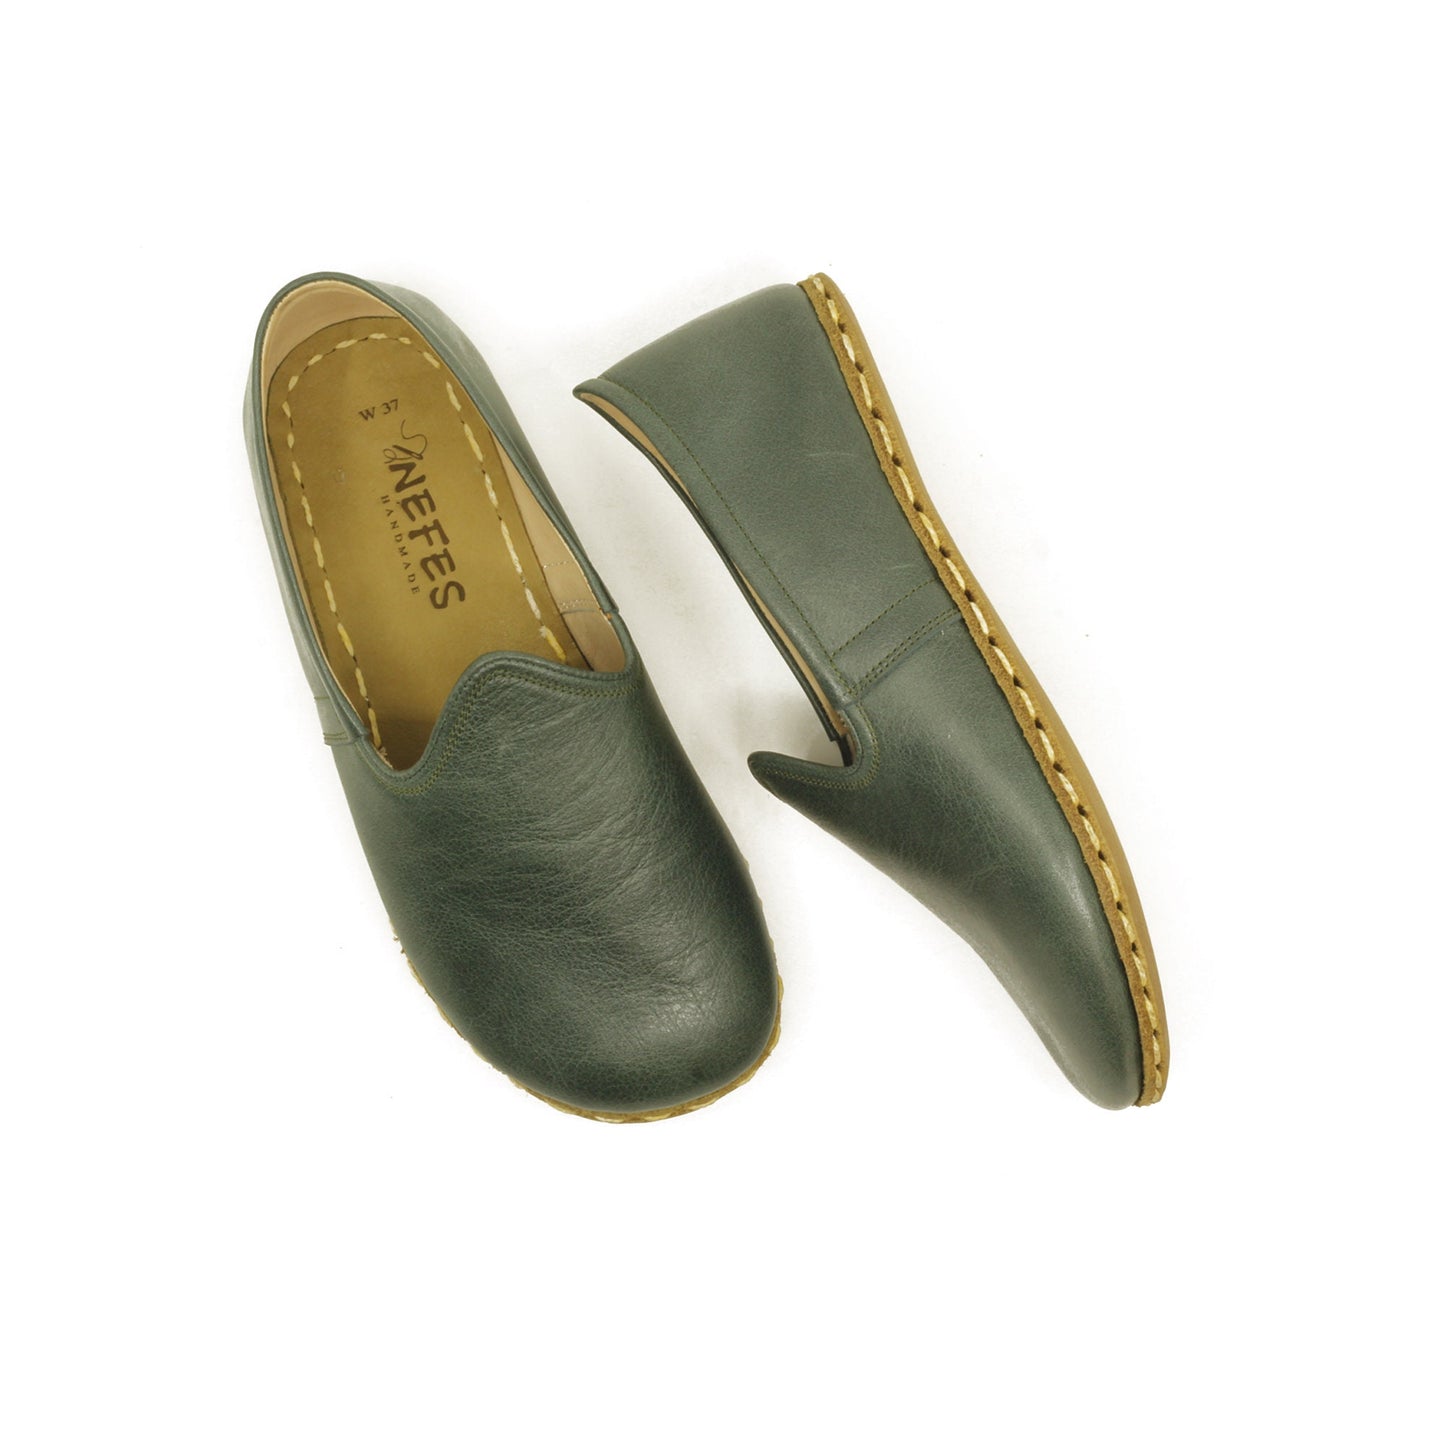 Handmade Green Leather Women's Barefoot Moccasin Loafers - A Stylish and Comfortable Addition to Your Wardrobe